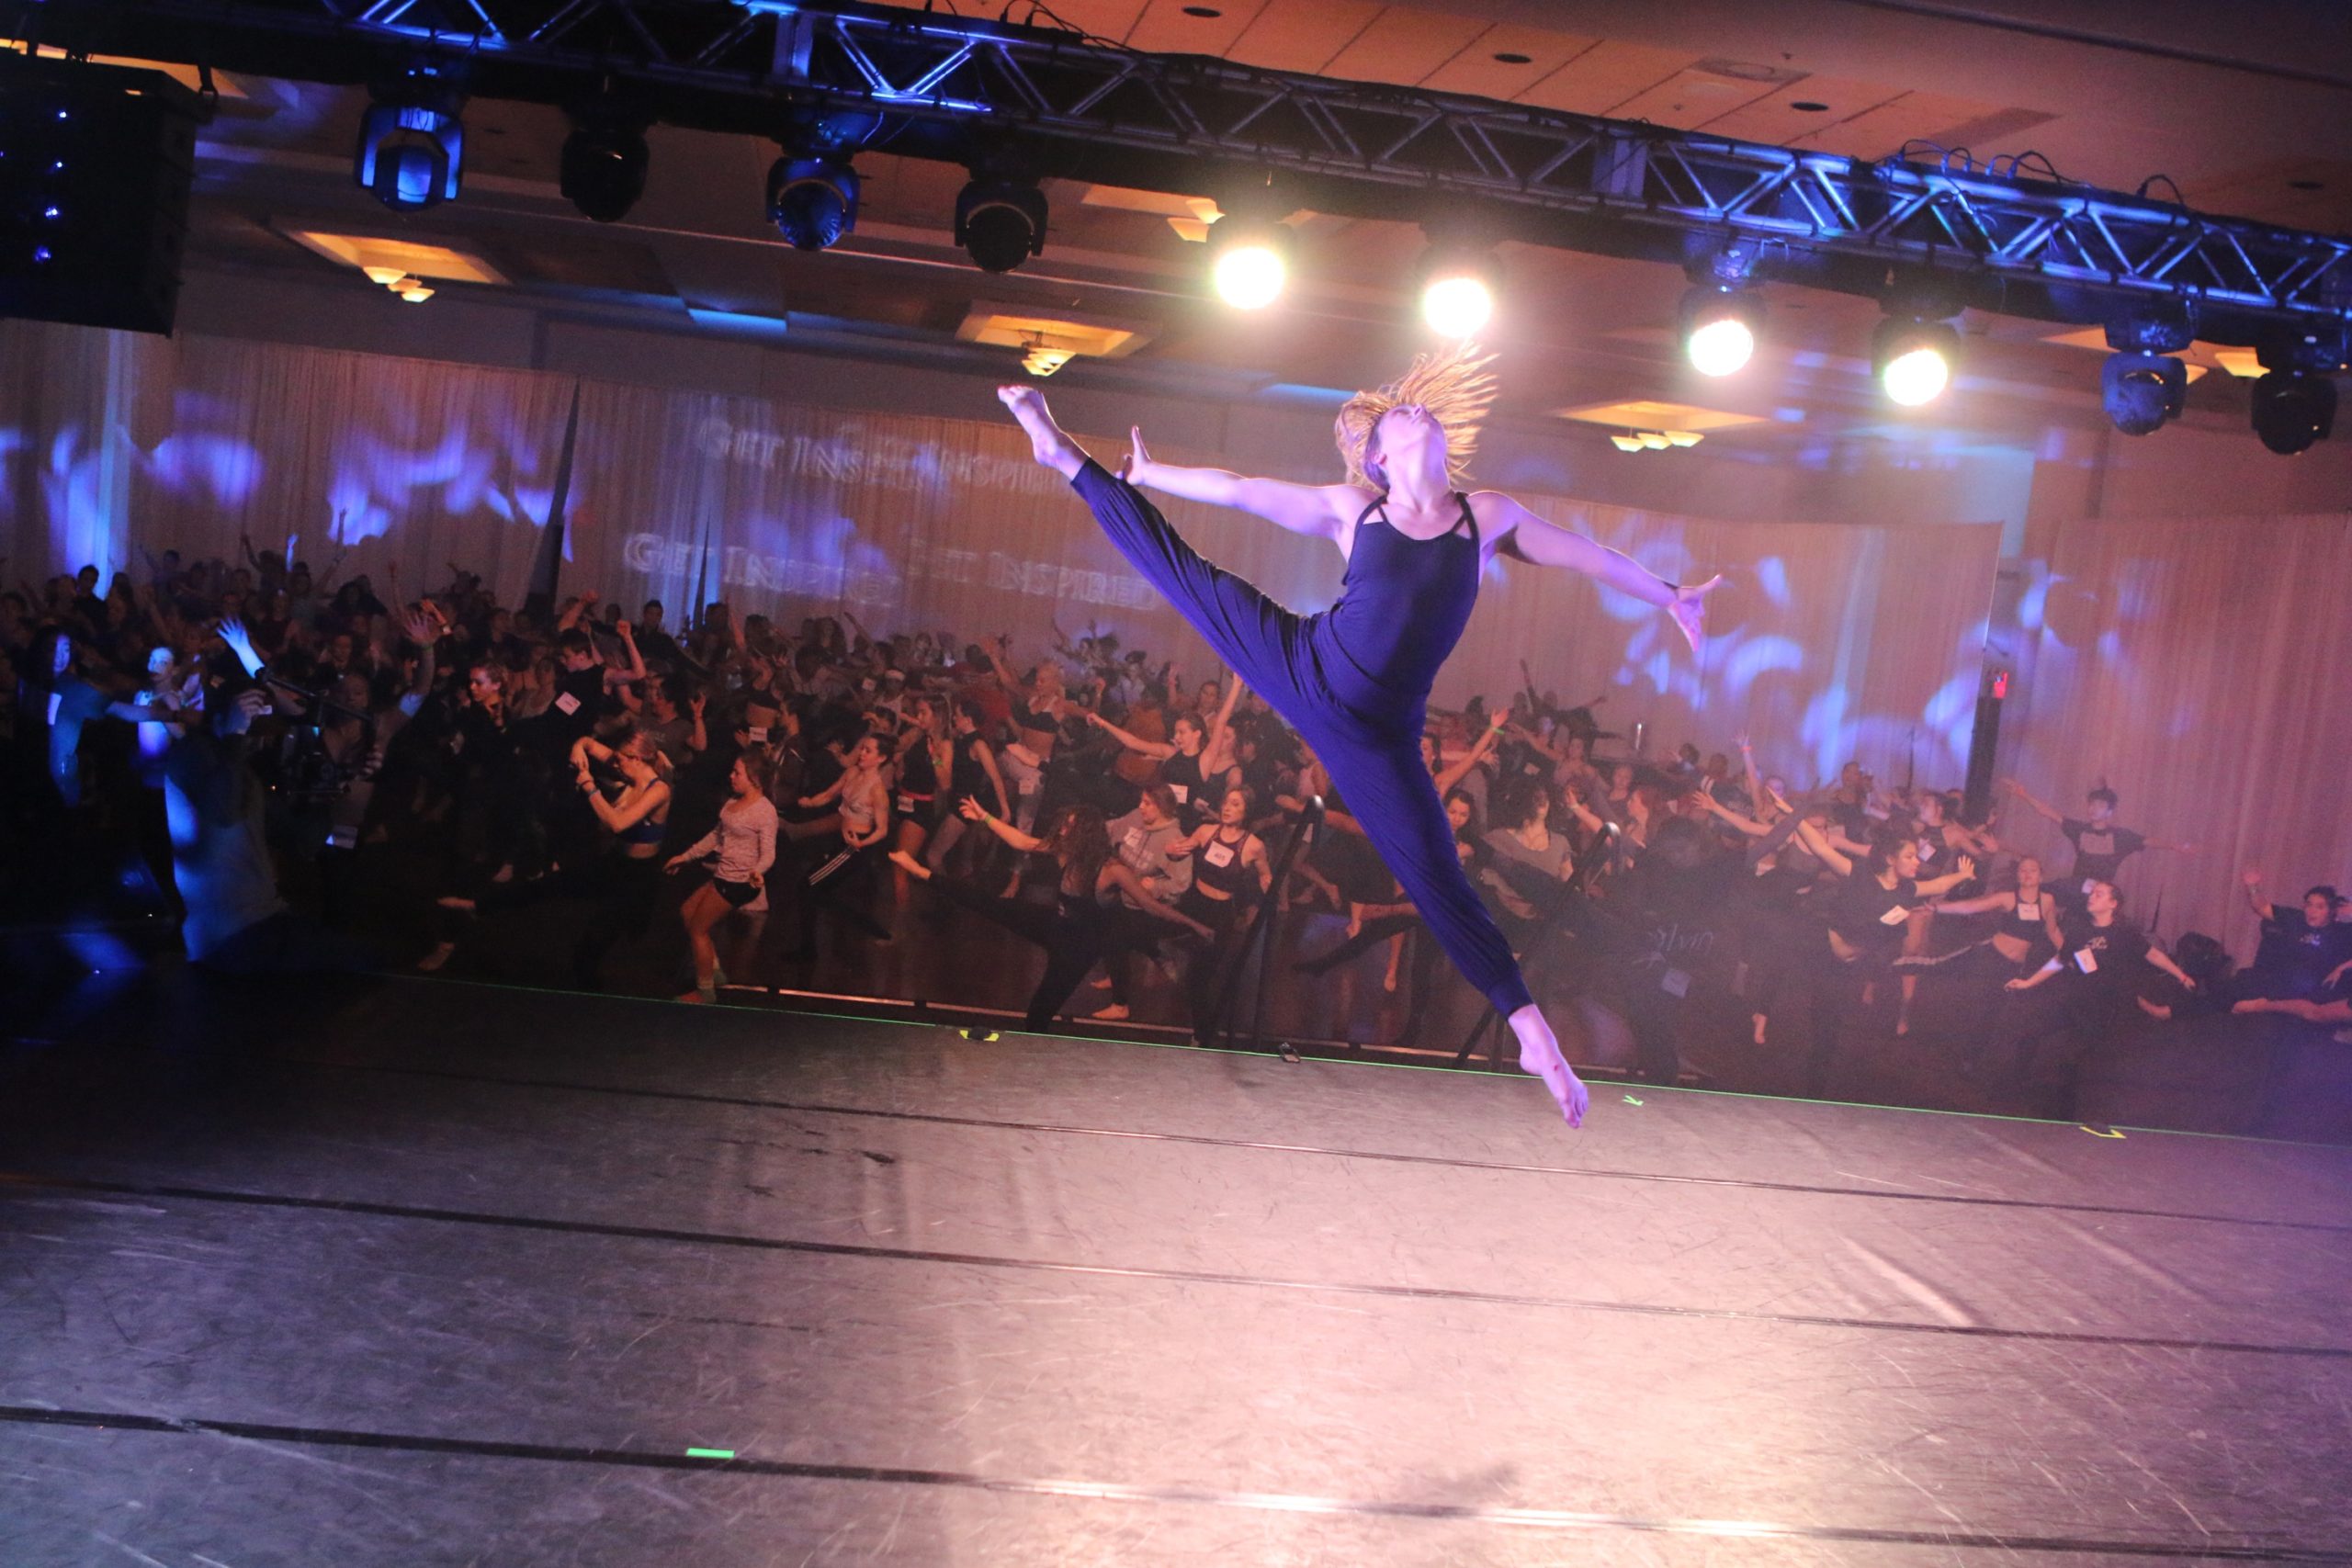 Hailee Payne leaps onstage at a convention, with what looks like hundreds of students watching her from below. She wears all black, and throws her head back as she jumps.